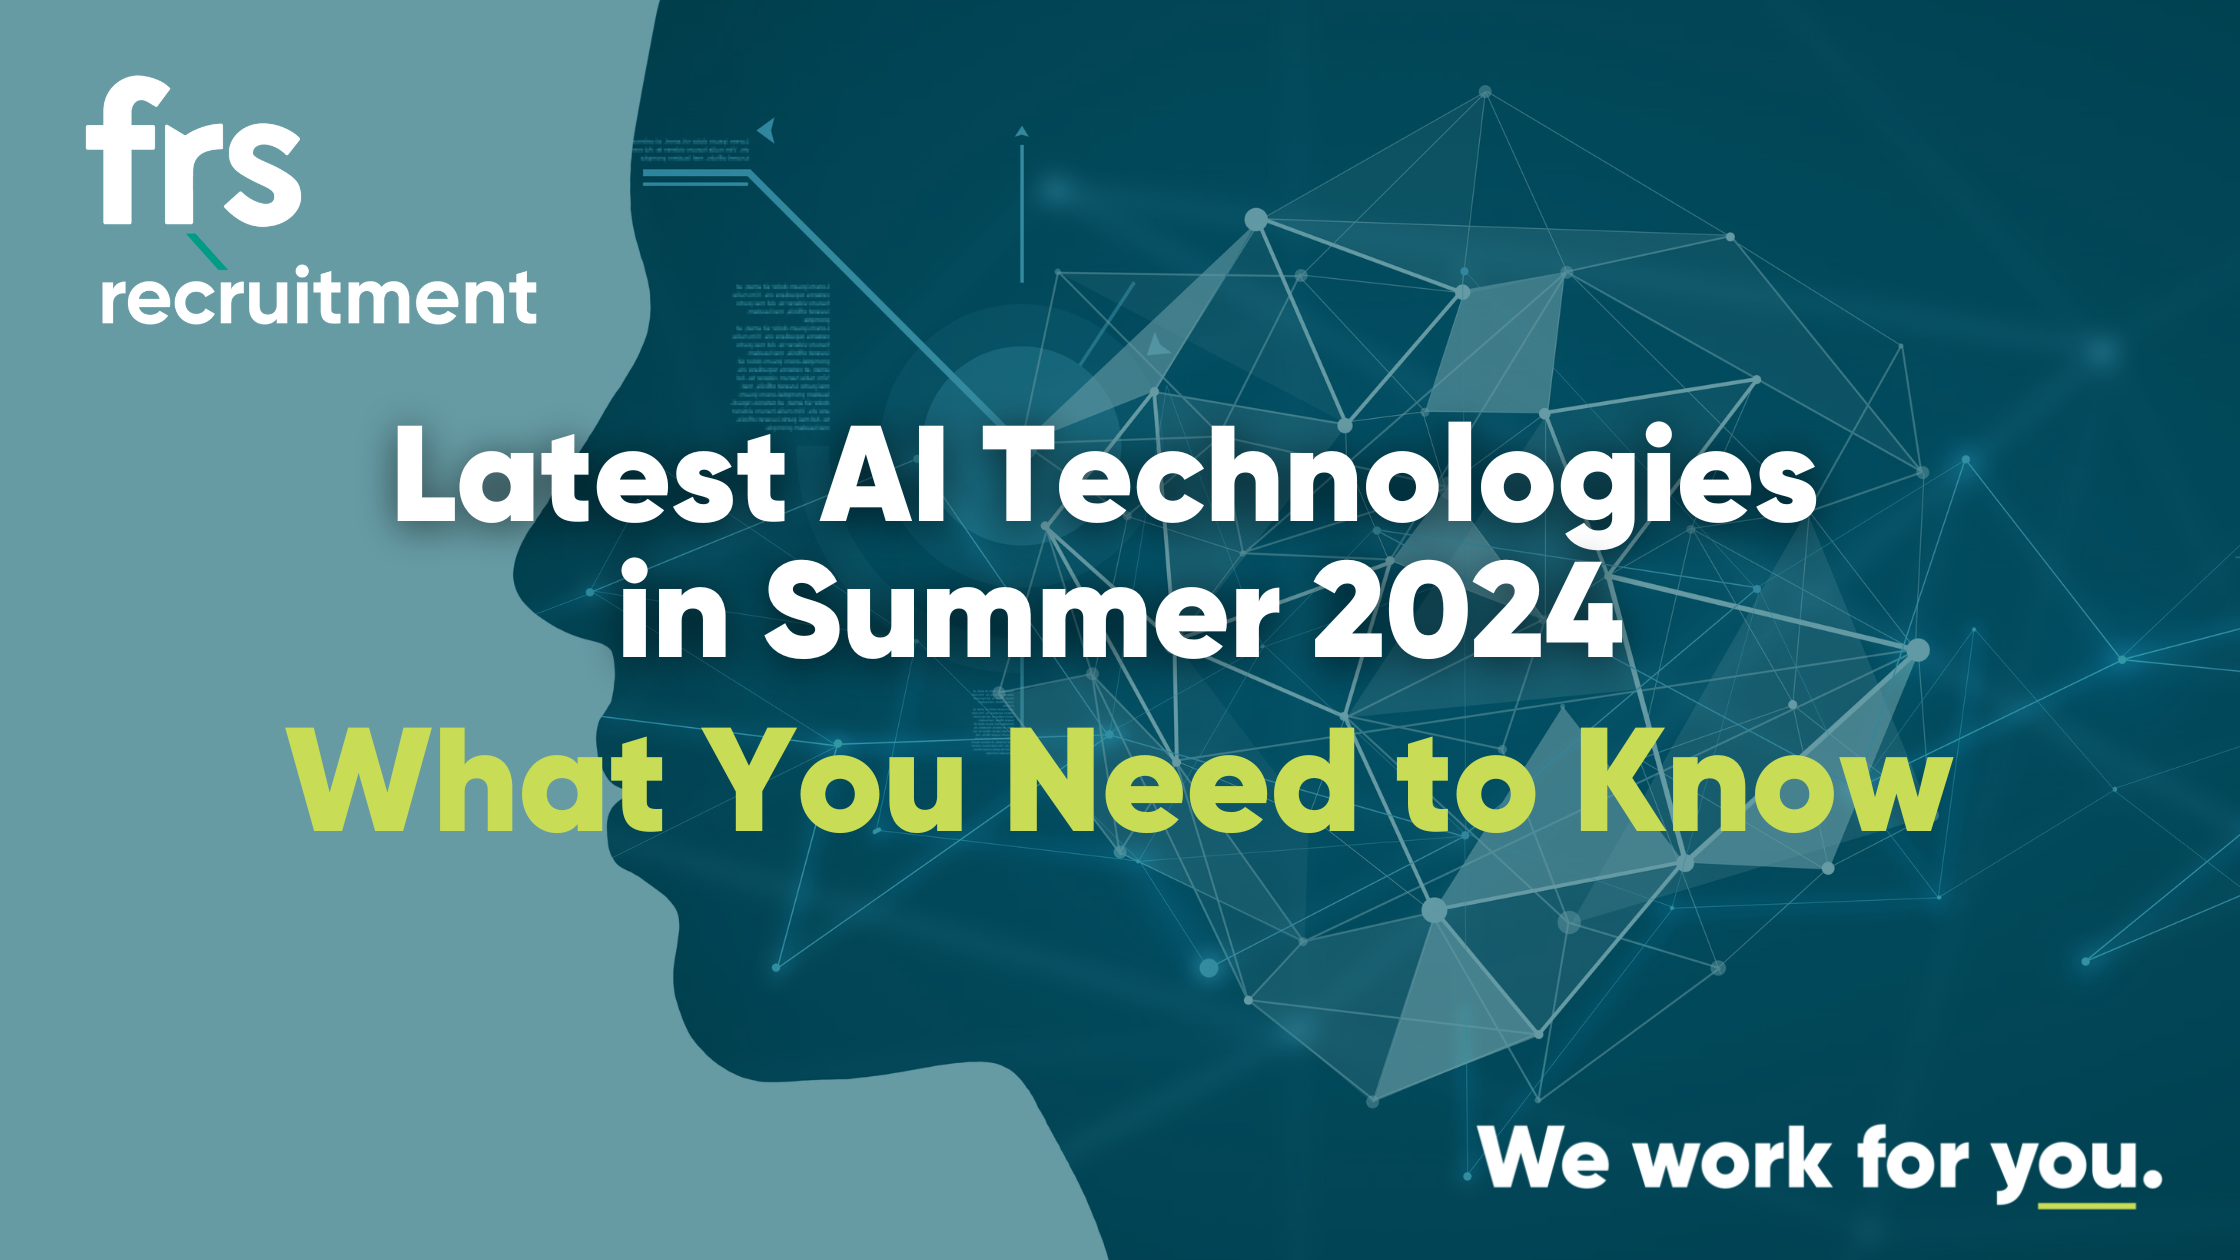 The Latest AI Technologies in Summer 2024: What You Need to Know